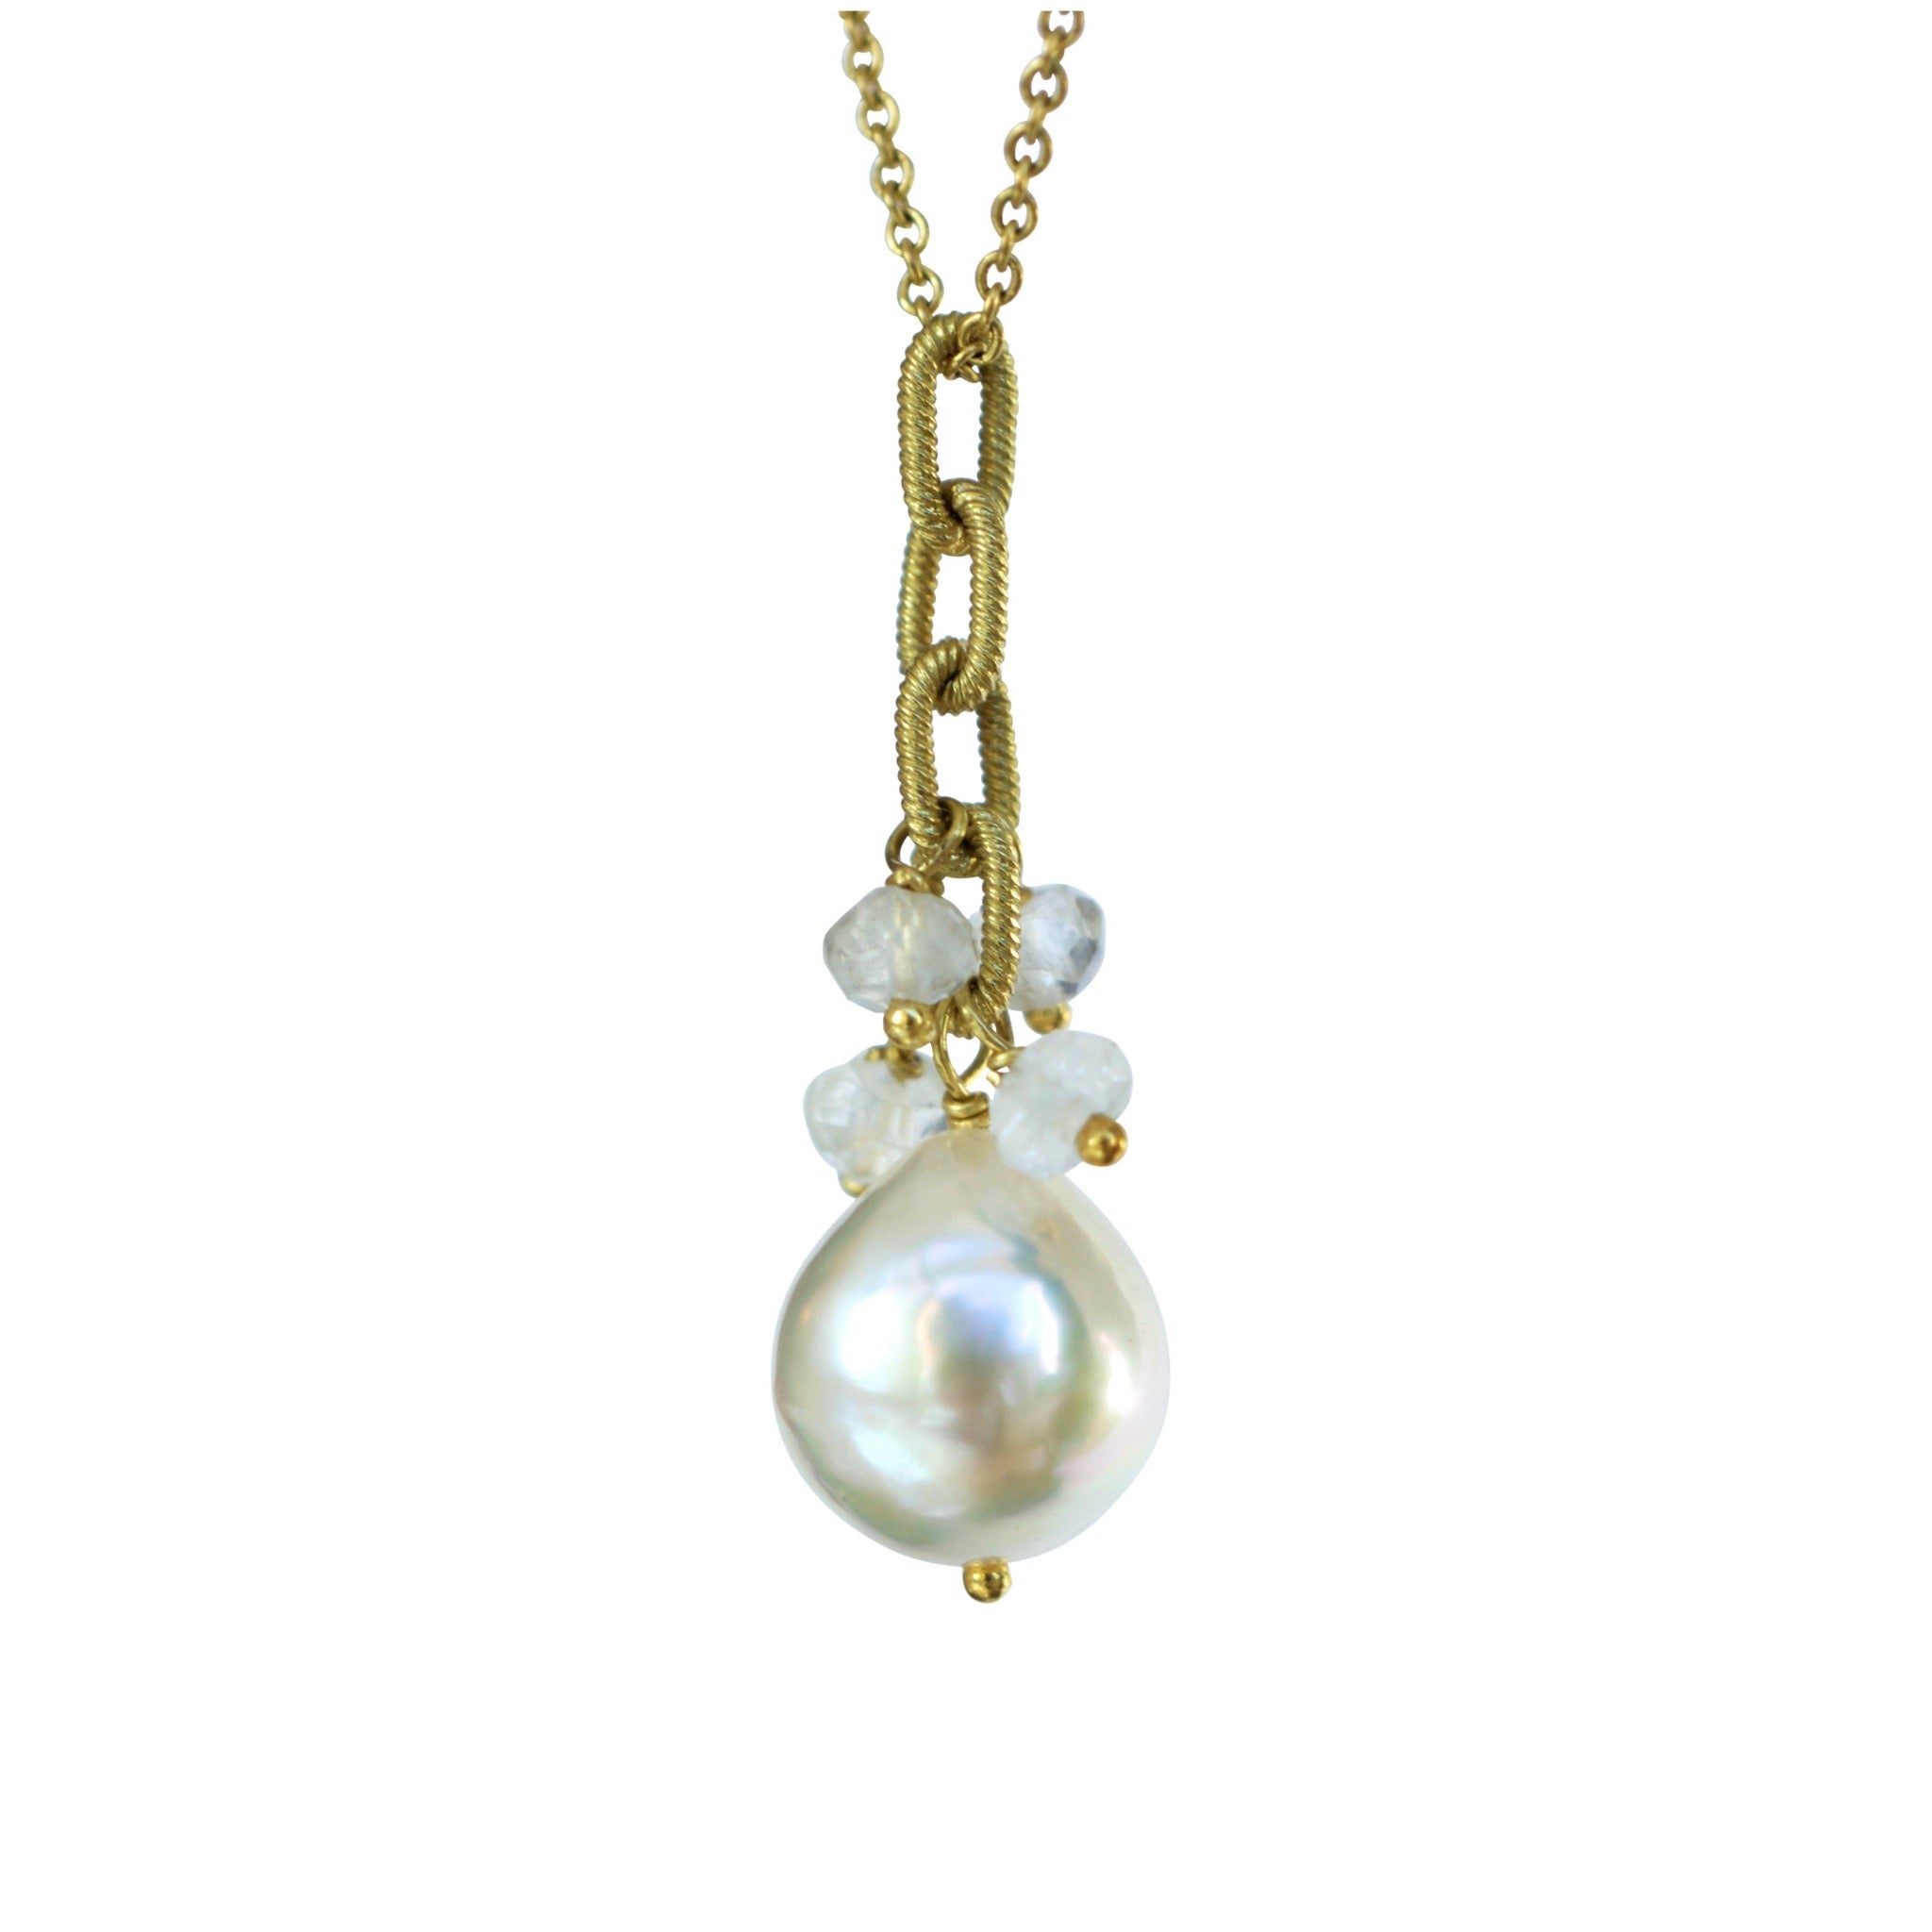 Duchess pearl necklace